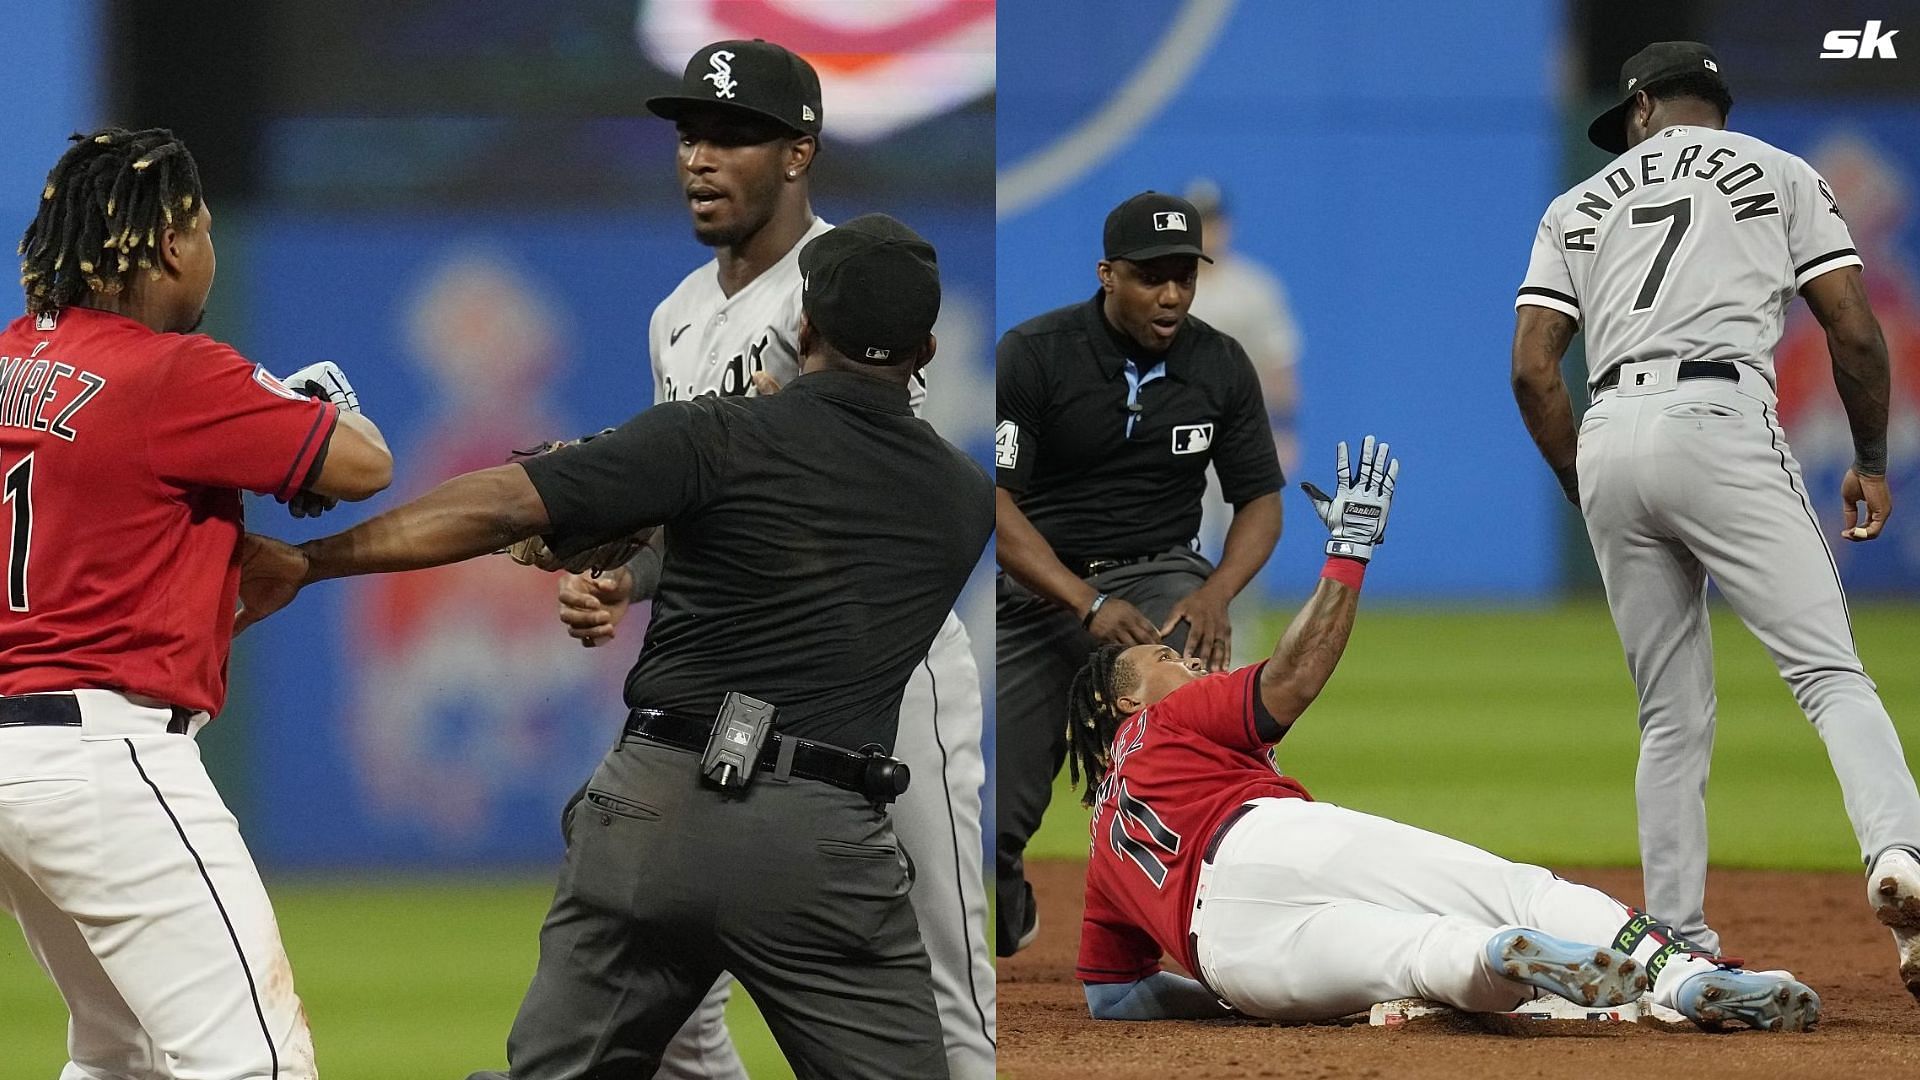 Jose Ramirez and Tim Anderson squared off after a verbal altercation near second base.